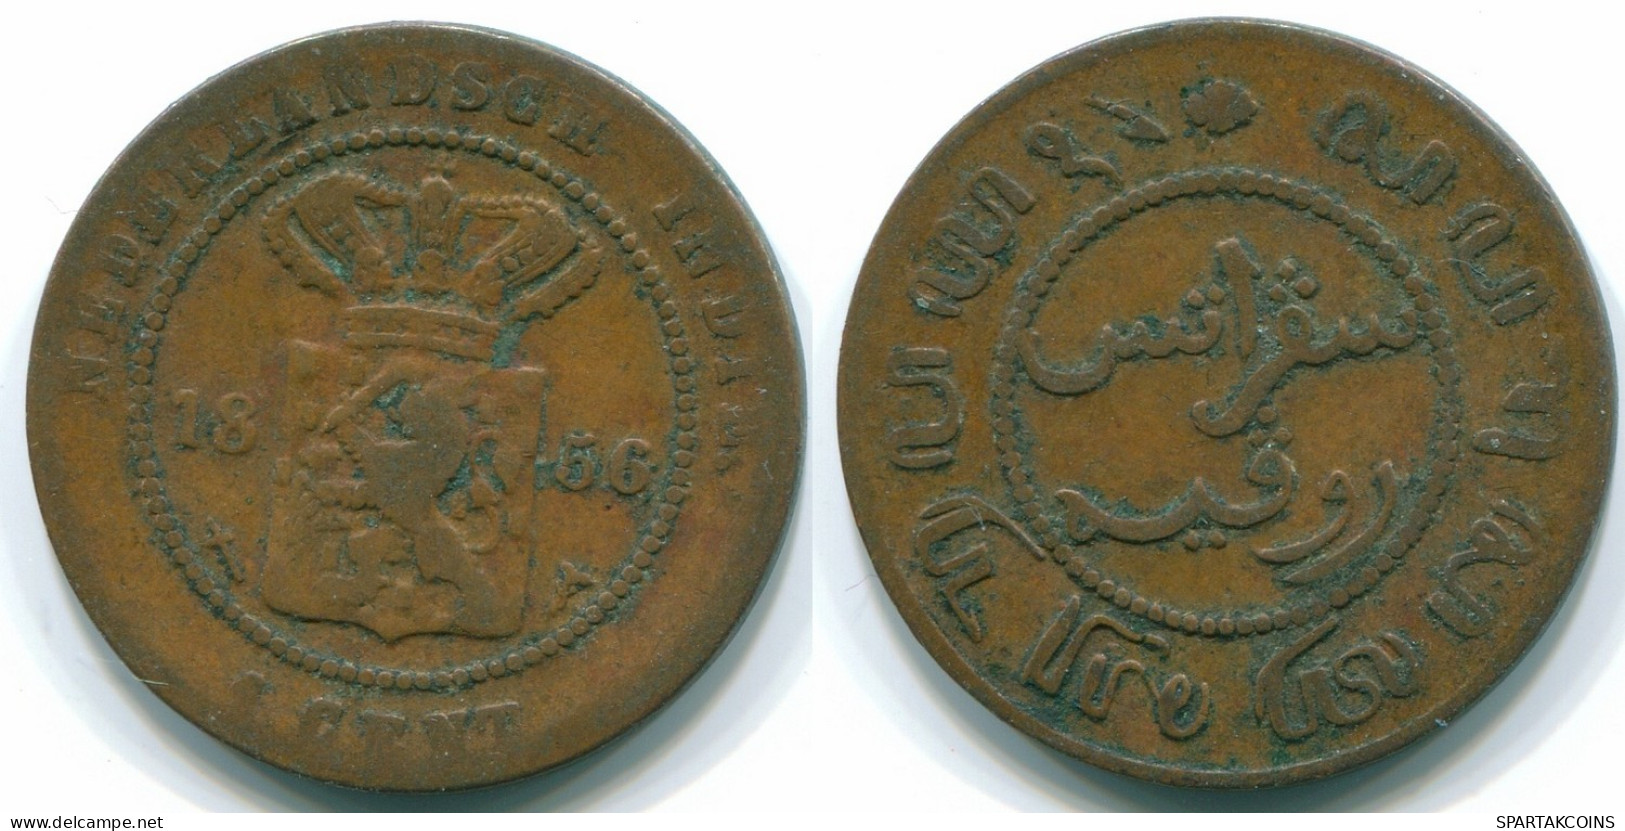 1 CENT 1856 NETHERLANDS EAST INDIES INDONESIA Copper Colonial Coin #S10022.U.A - Indes Neerlandesas